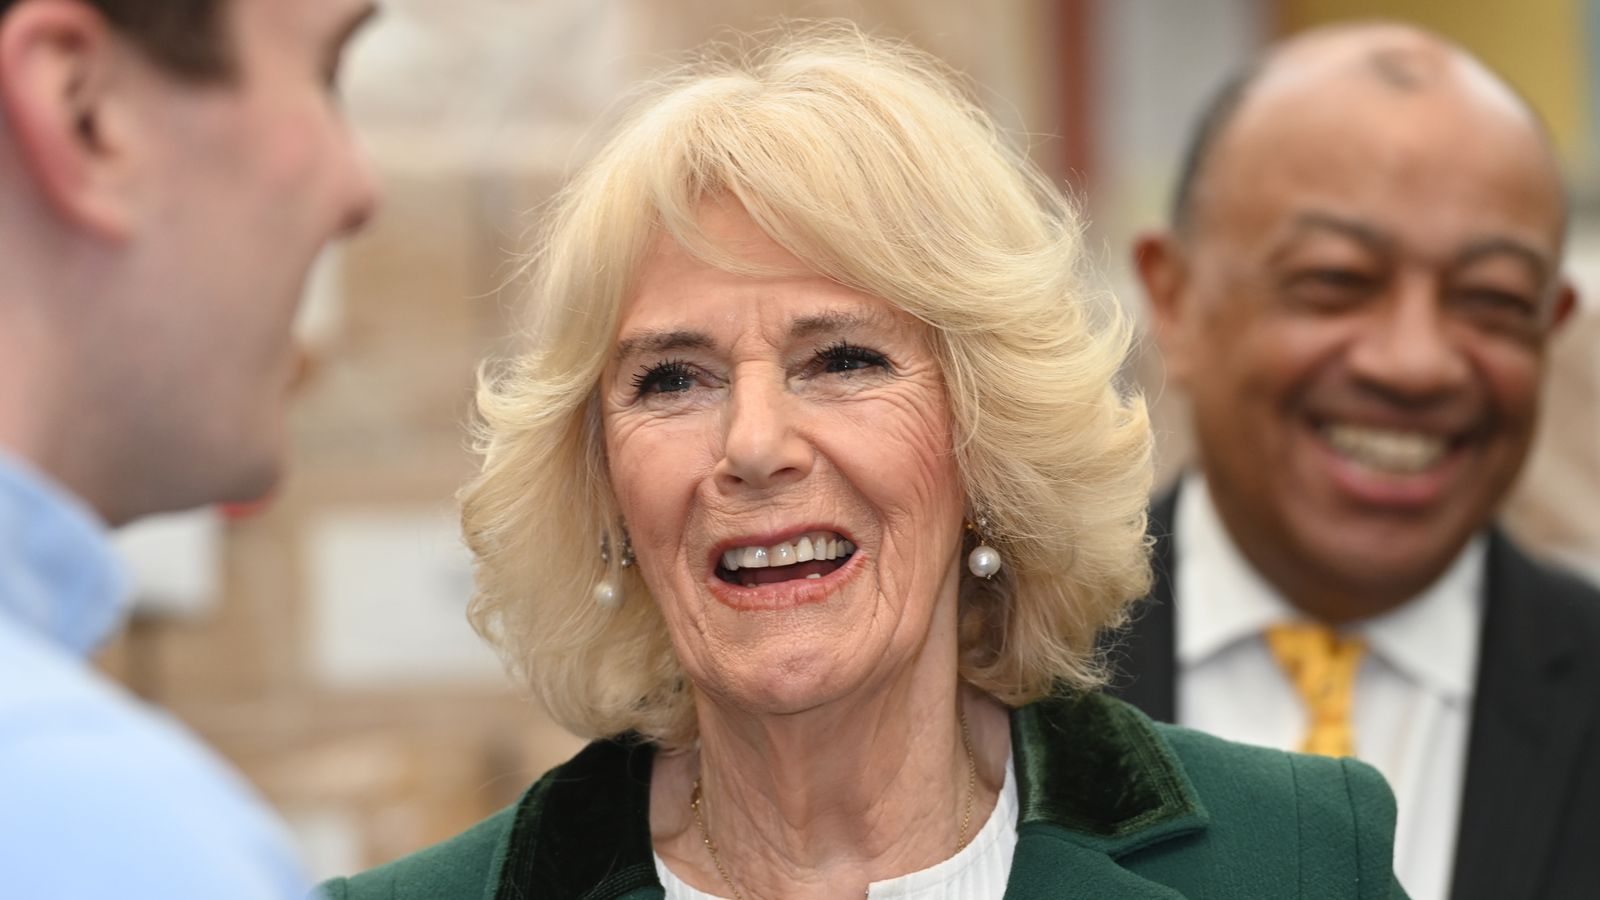 Queen Consort Camilla has tested positive for COVID-19, Buckingham Palace says